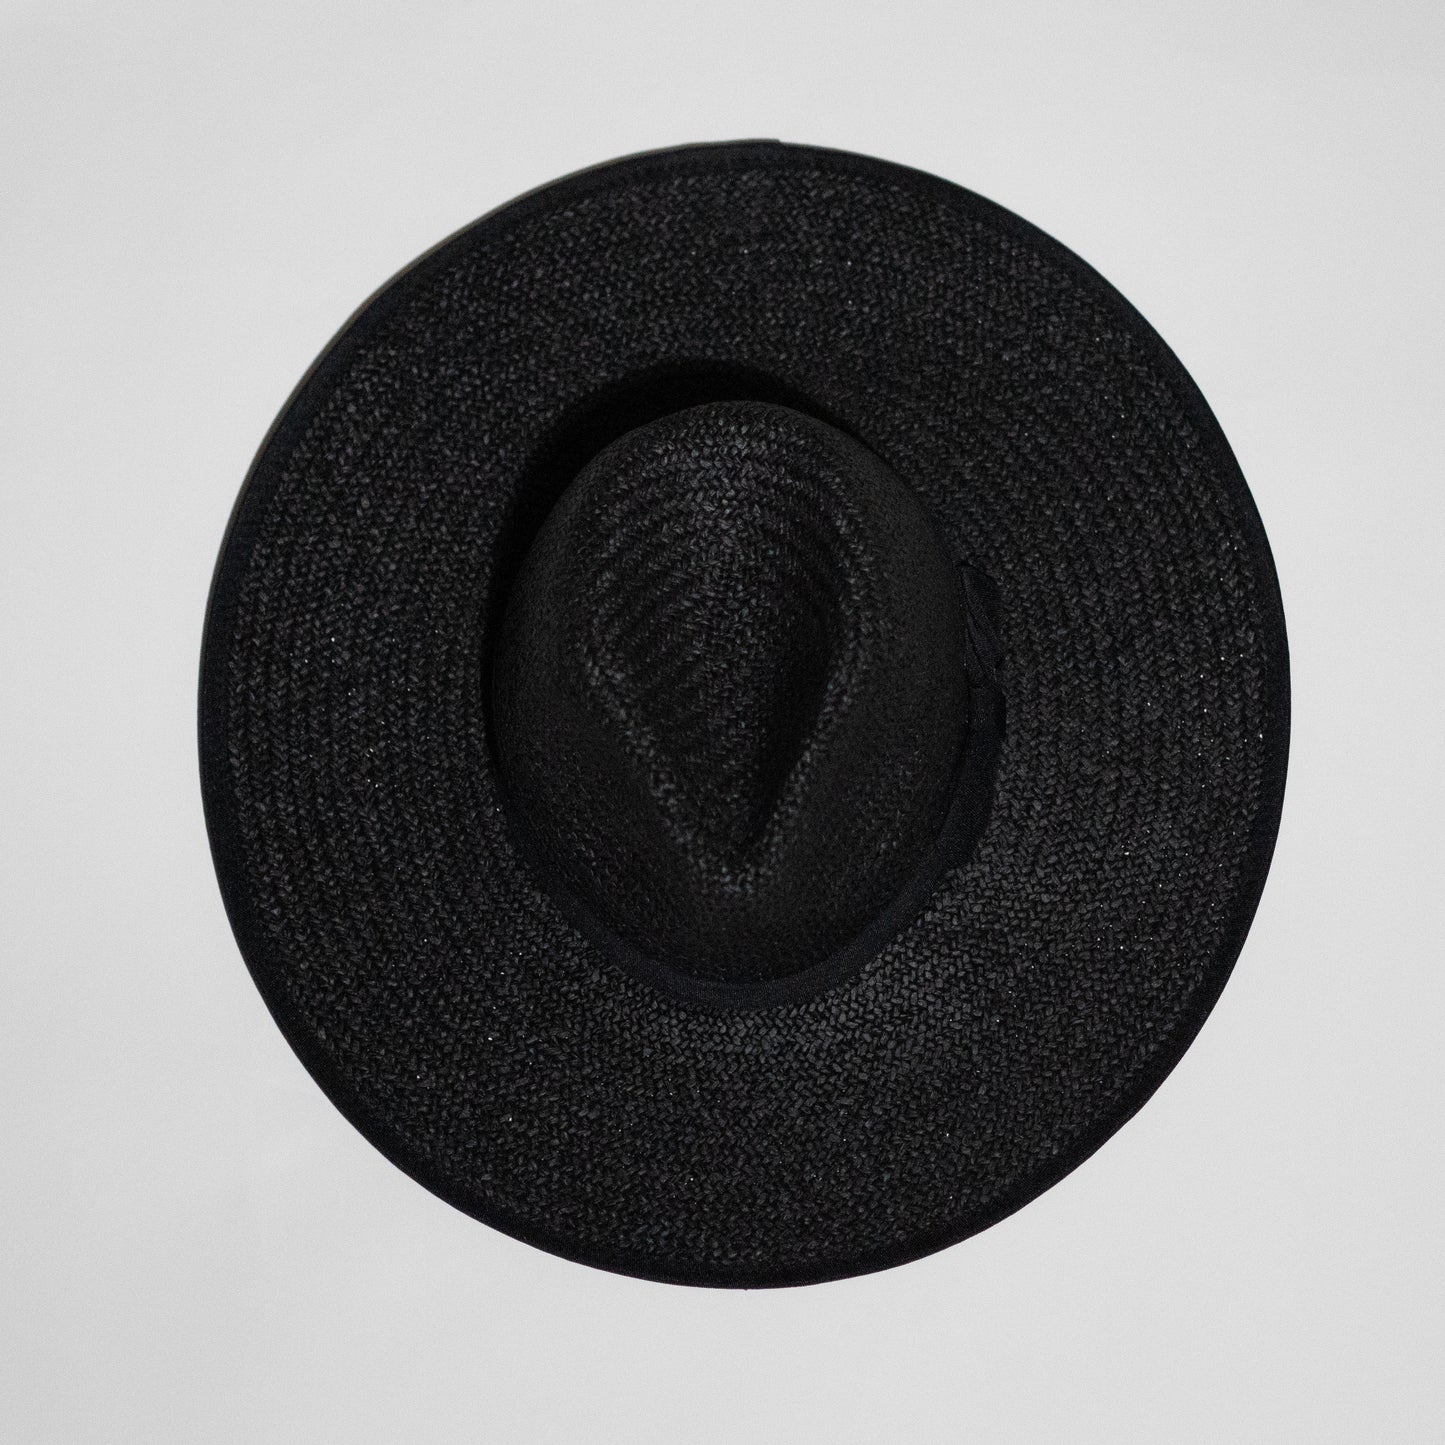 Wide Brim Straw Rancher Hats Black Circumference 16 inches Blaze and Sparkles